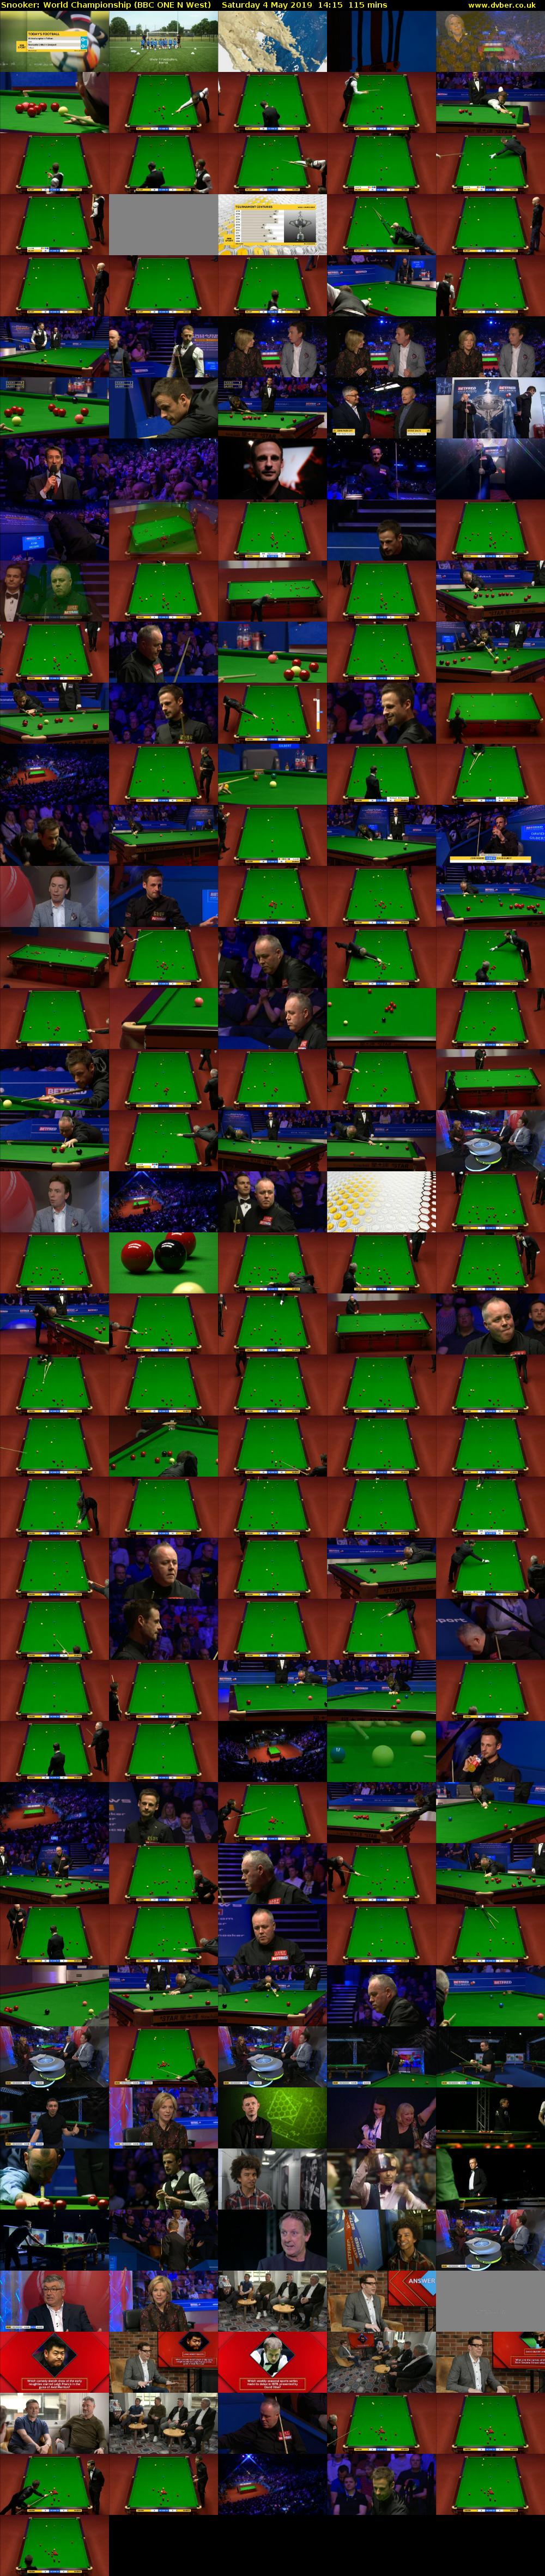 Snooker: World Championship (BBC ONE N West) Saturday 4 May 2019 14:15 - 16:10